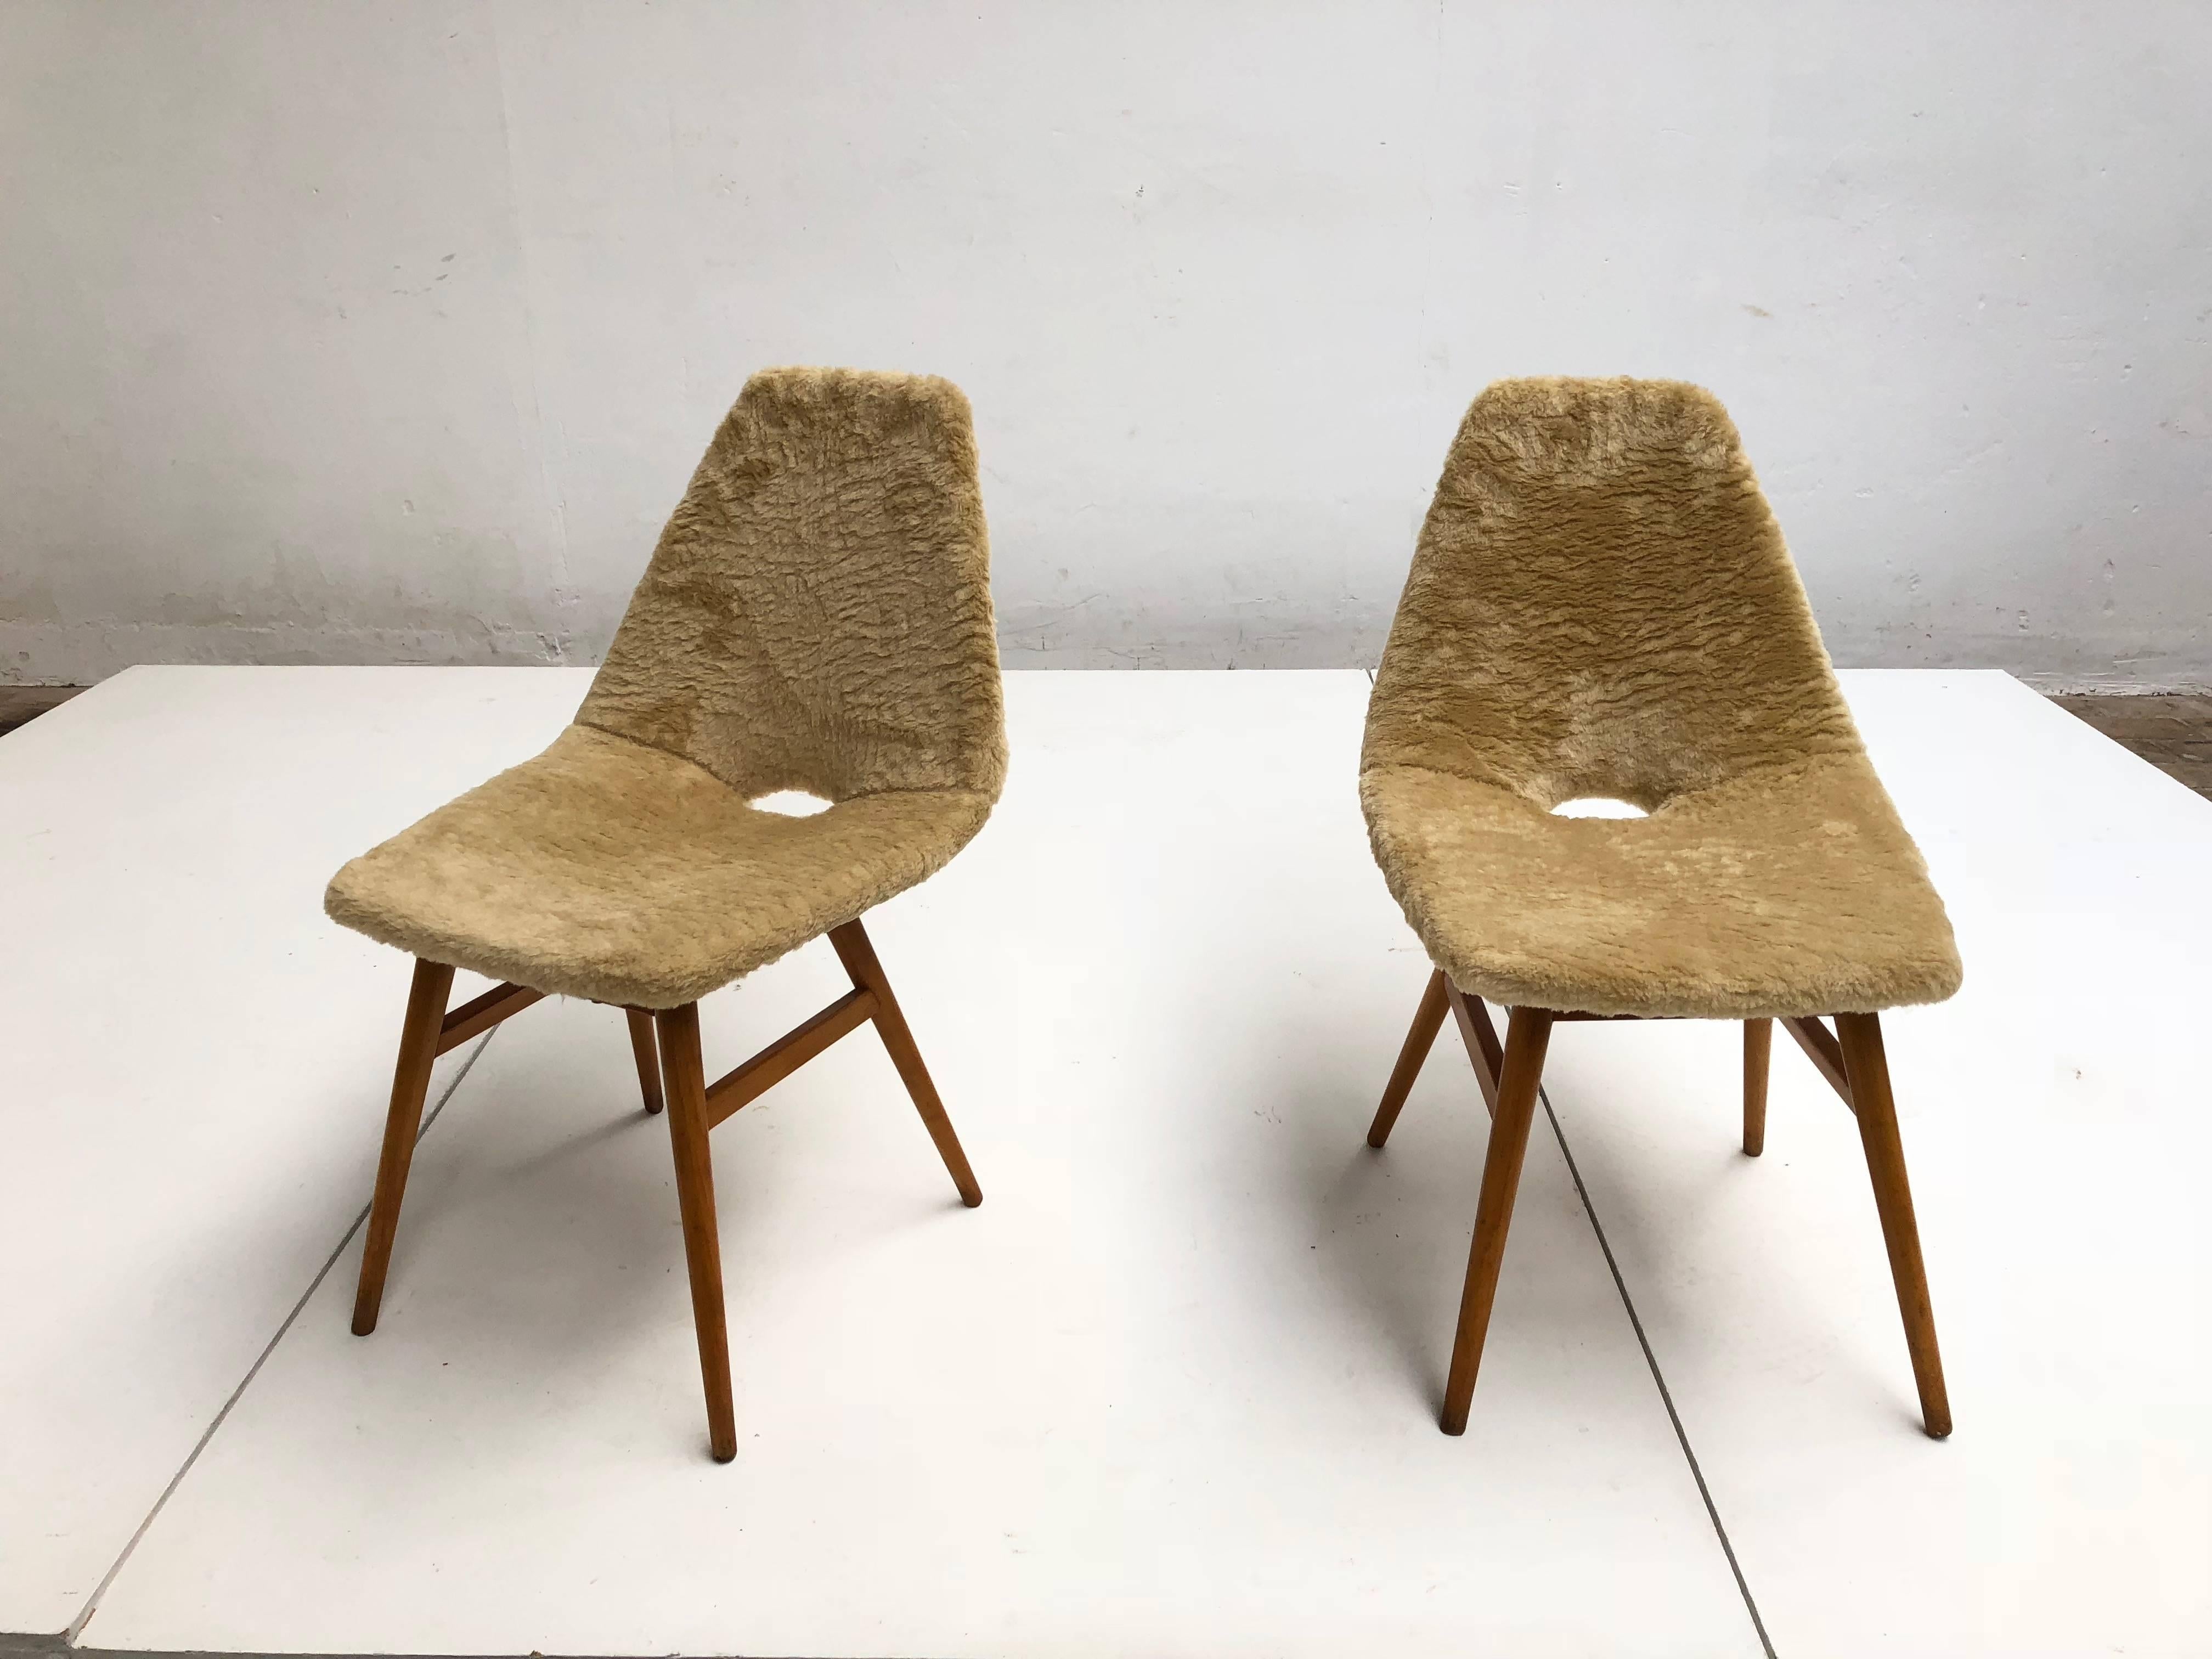 Faux Fur Pair of Side Chairs by Judit Burian & Erika Szek Hungary, circa 1959 For Sale